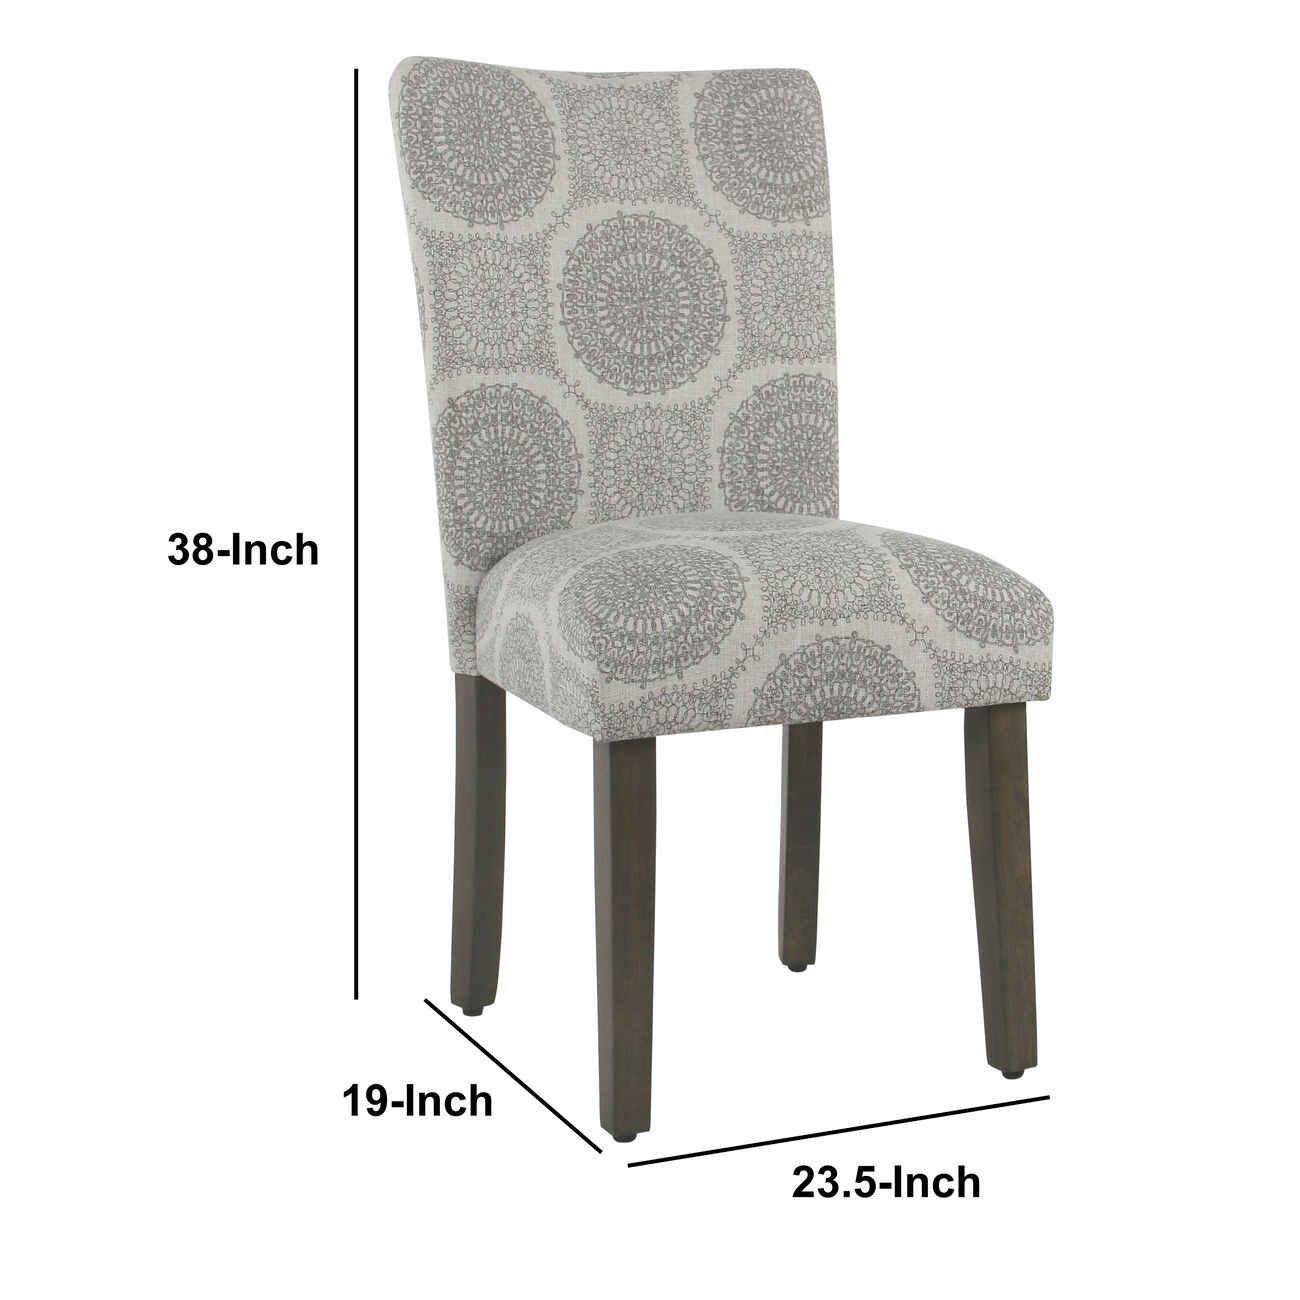 Medallion Pattern Fabric Upholstered Parsons Chair with Wooden Legs, Gray and Brown, Set of Two